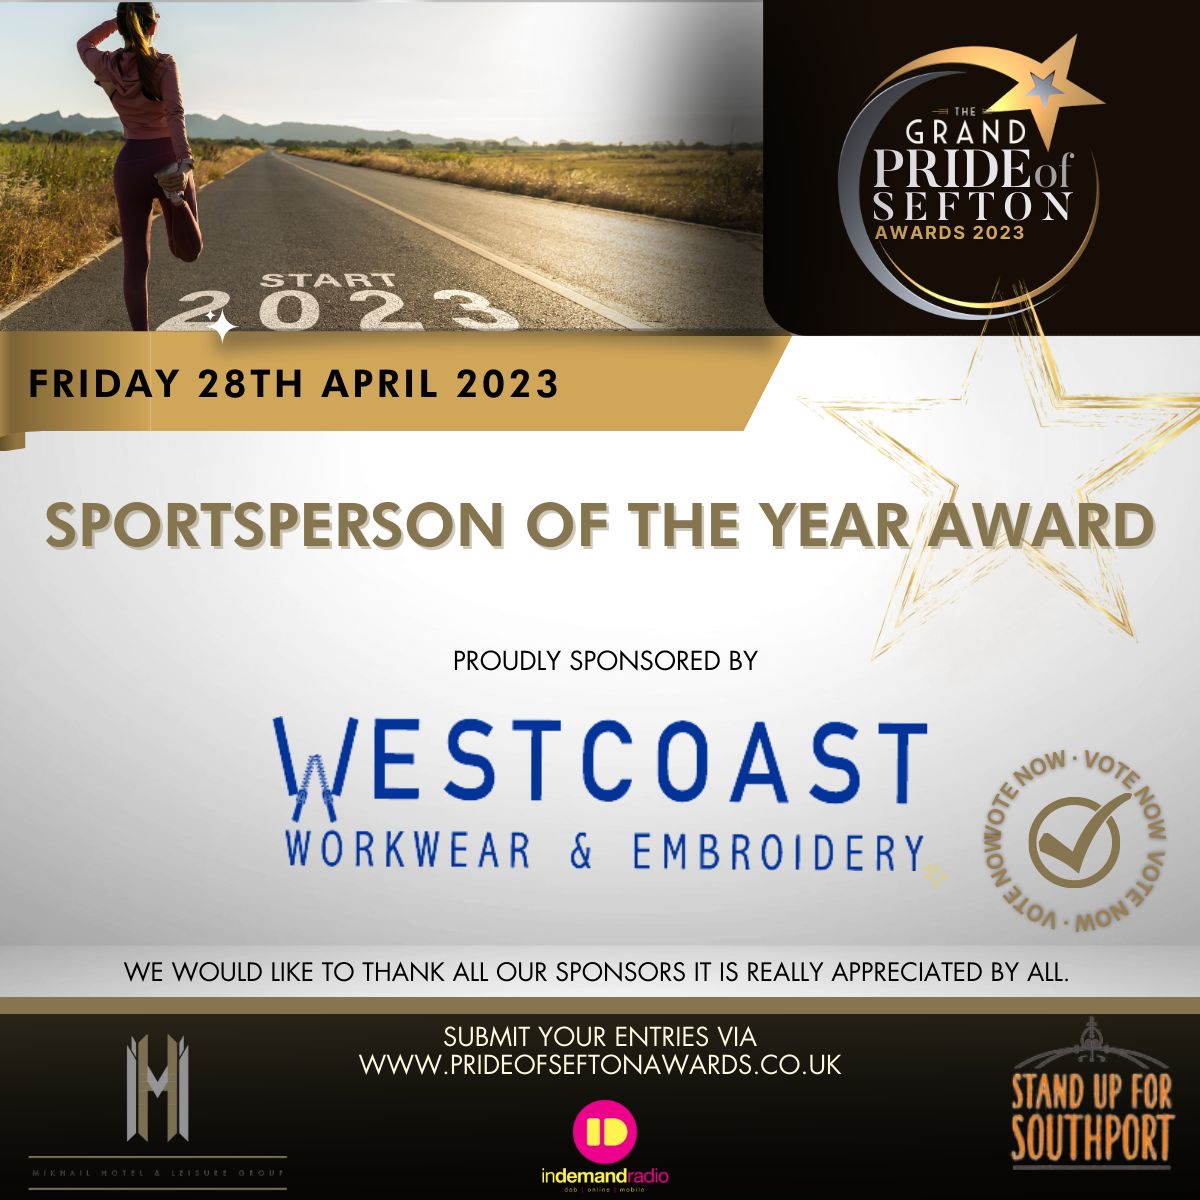 Workwear and Embroidery is sponsoring the Sportsperson Of The Year category in the 2023 Pride Of Sefton Awards